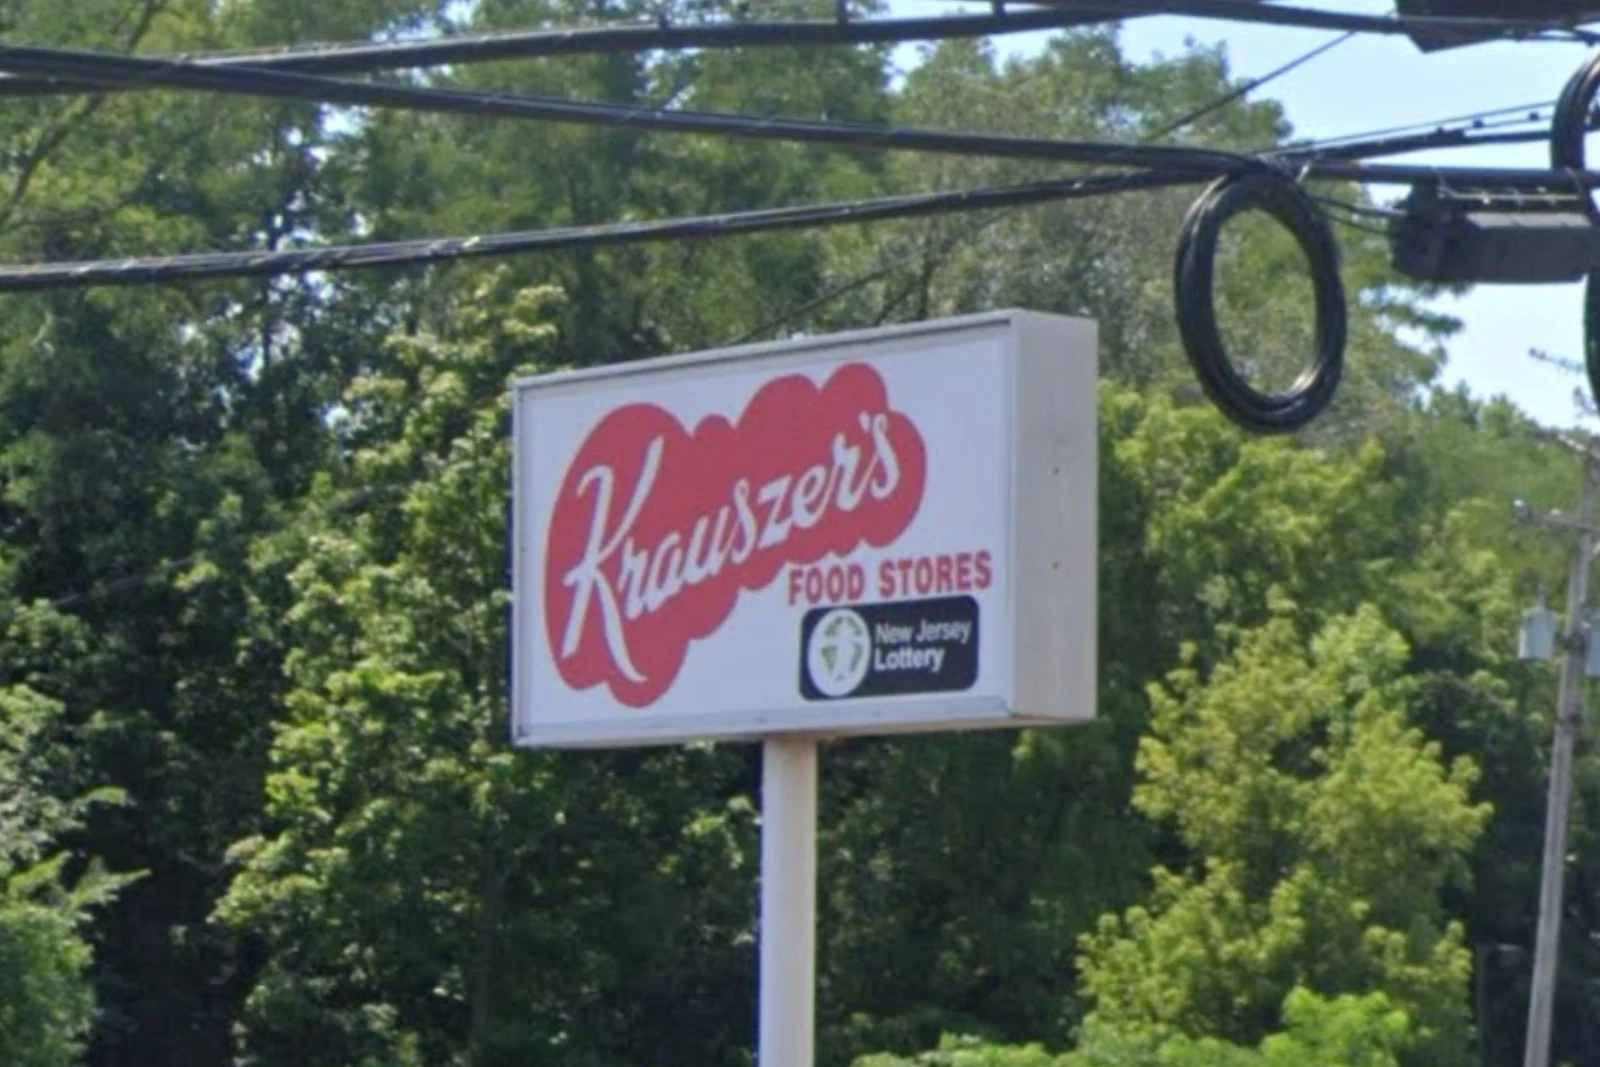 Krauszer's Food Stores in Freehold NJ - Photo: Google Maps